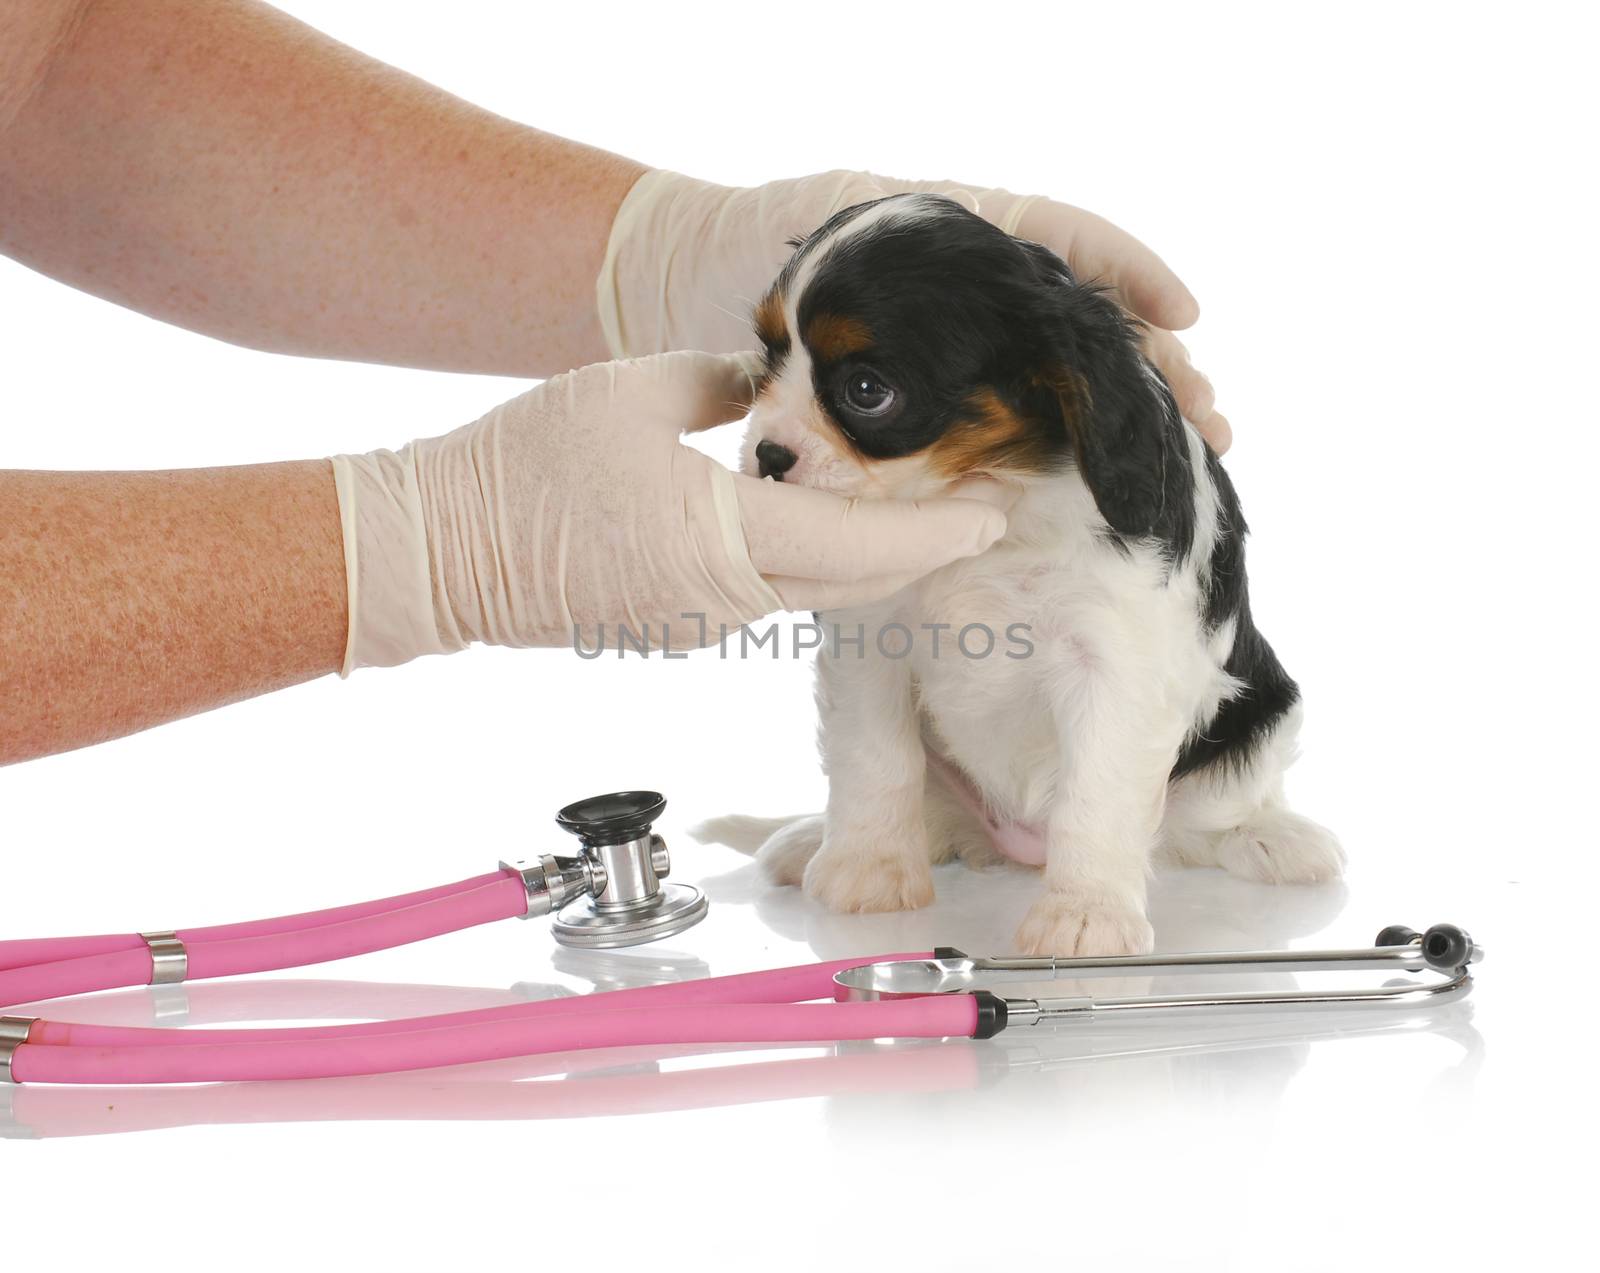 veterinary care - cavalier king charles spaniel puppy being examined by veterinarian on white background